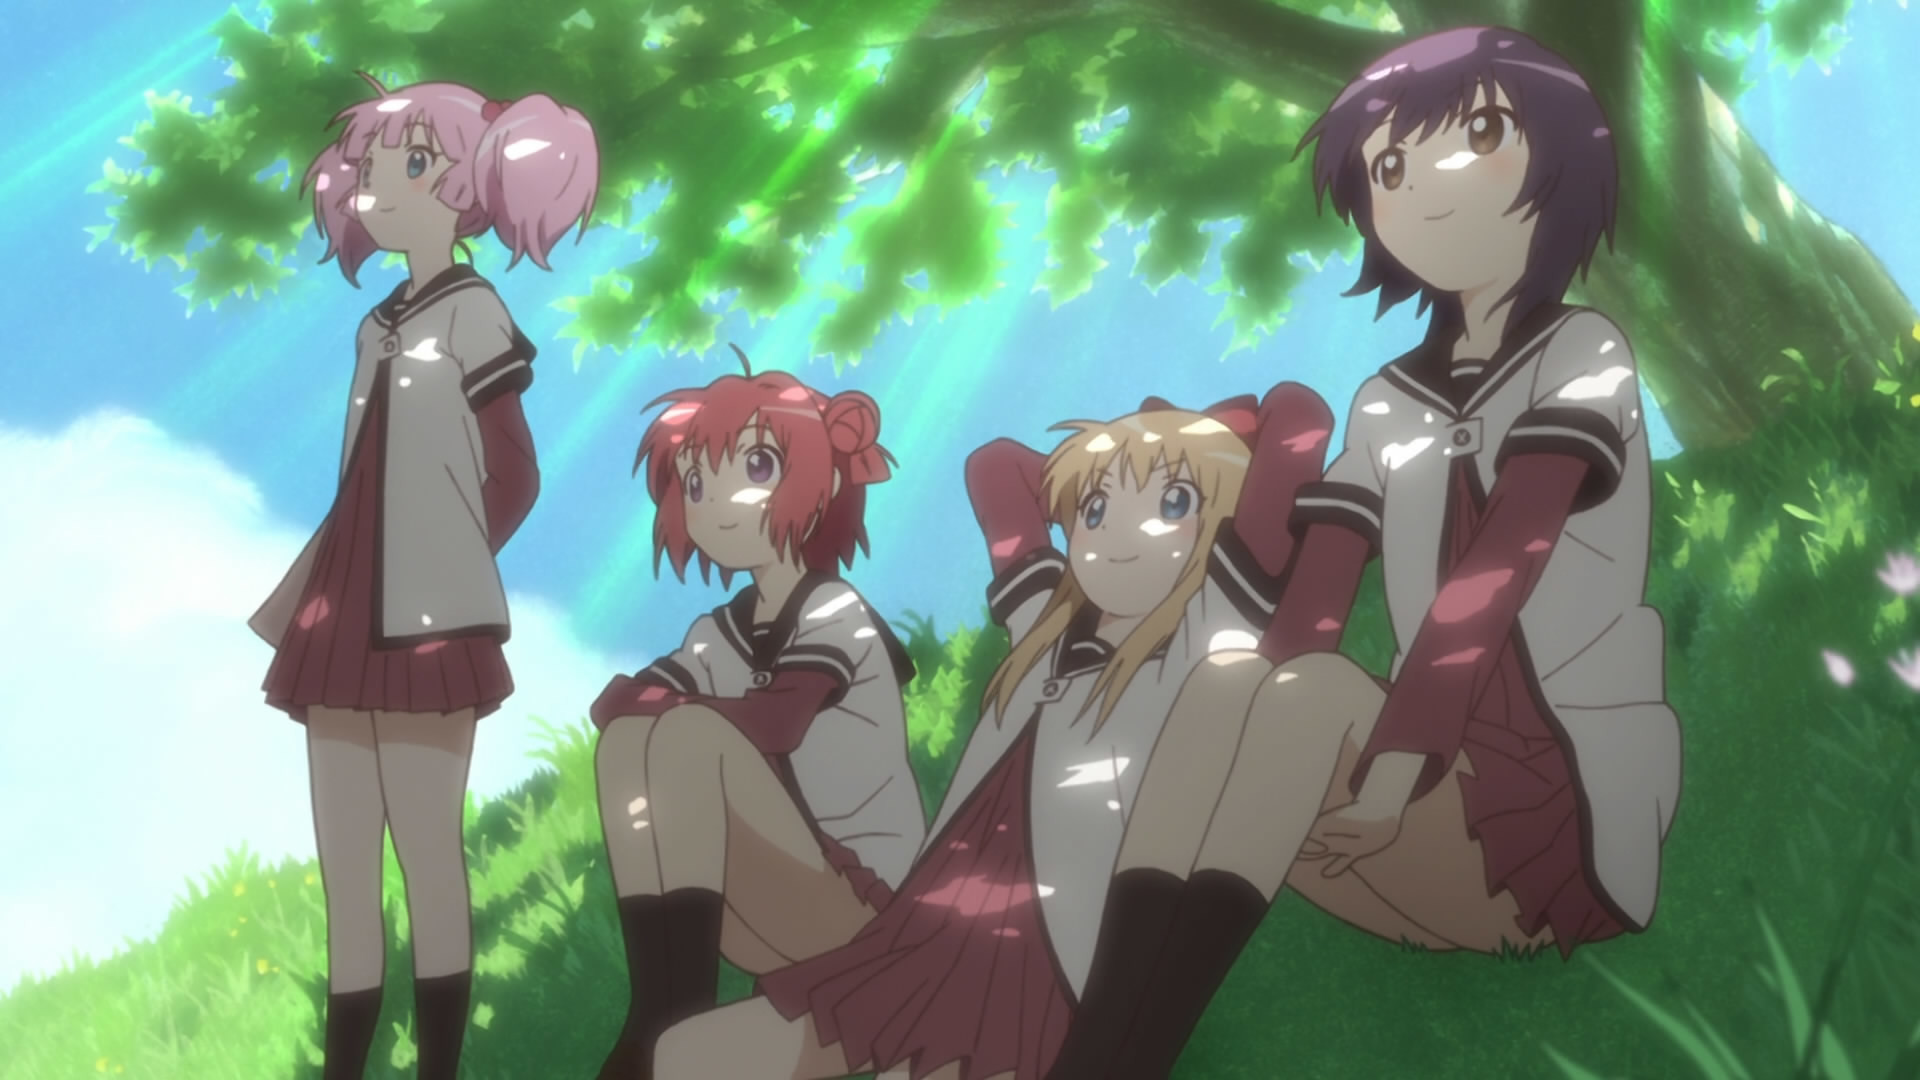 1920x1080 From left to right, Chinatsu, Akari, Kyouko, and Yui.